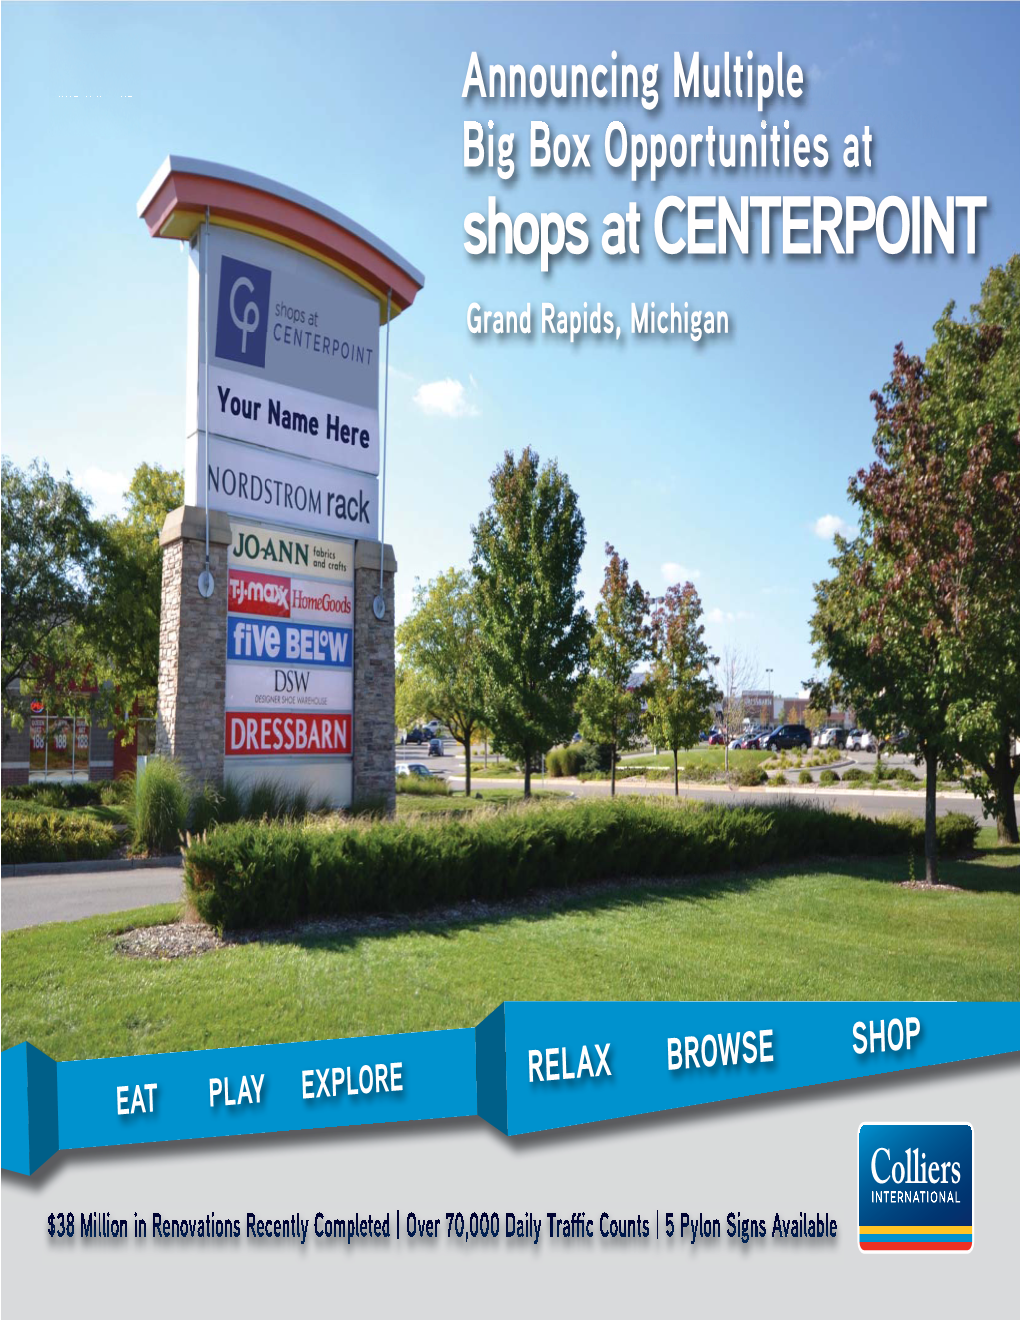 Shops at Centerpoint.Indd